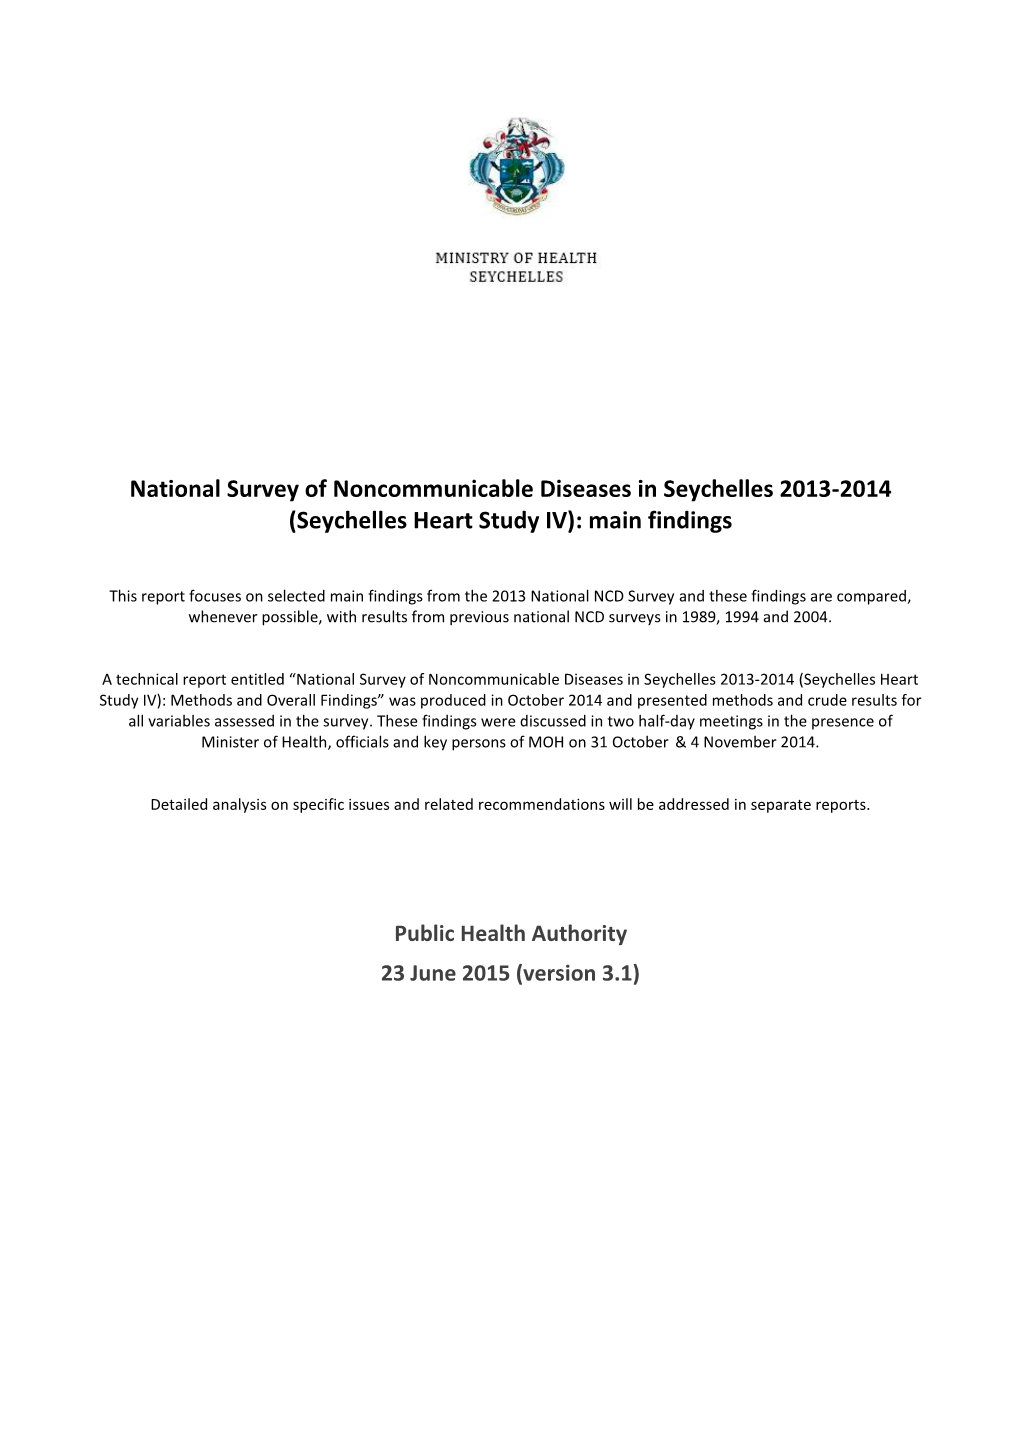 National Survey of Noncommunicable Diseases in Seychelles 2013-2014 (Seychelles Heart Study IV): Main Findings